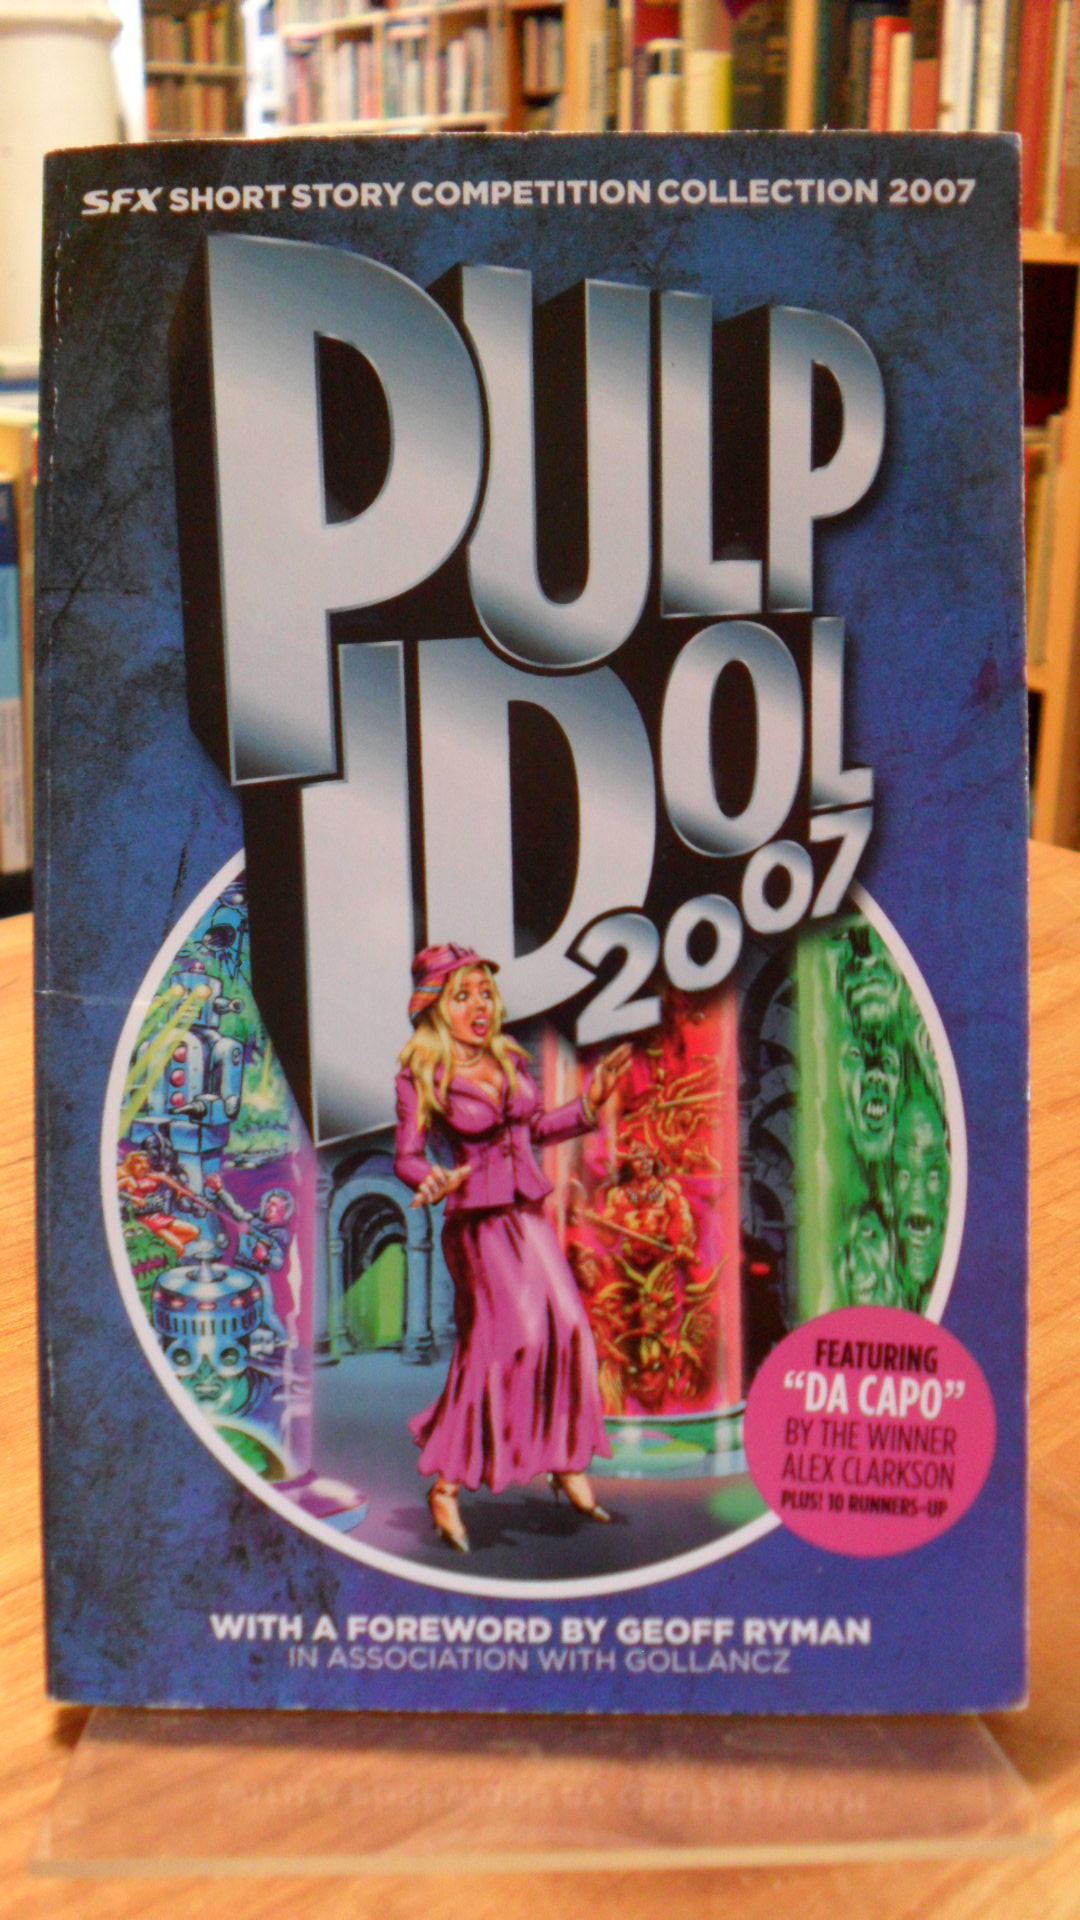 Clarkson, Pulp Idol 2007  – SFX Short Story Competition Collection 2007,